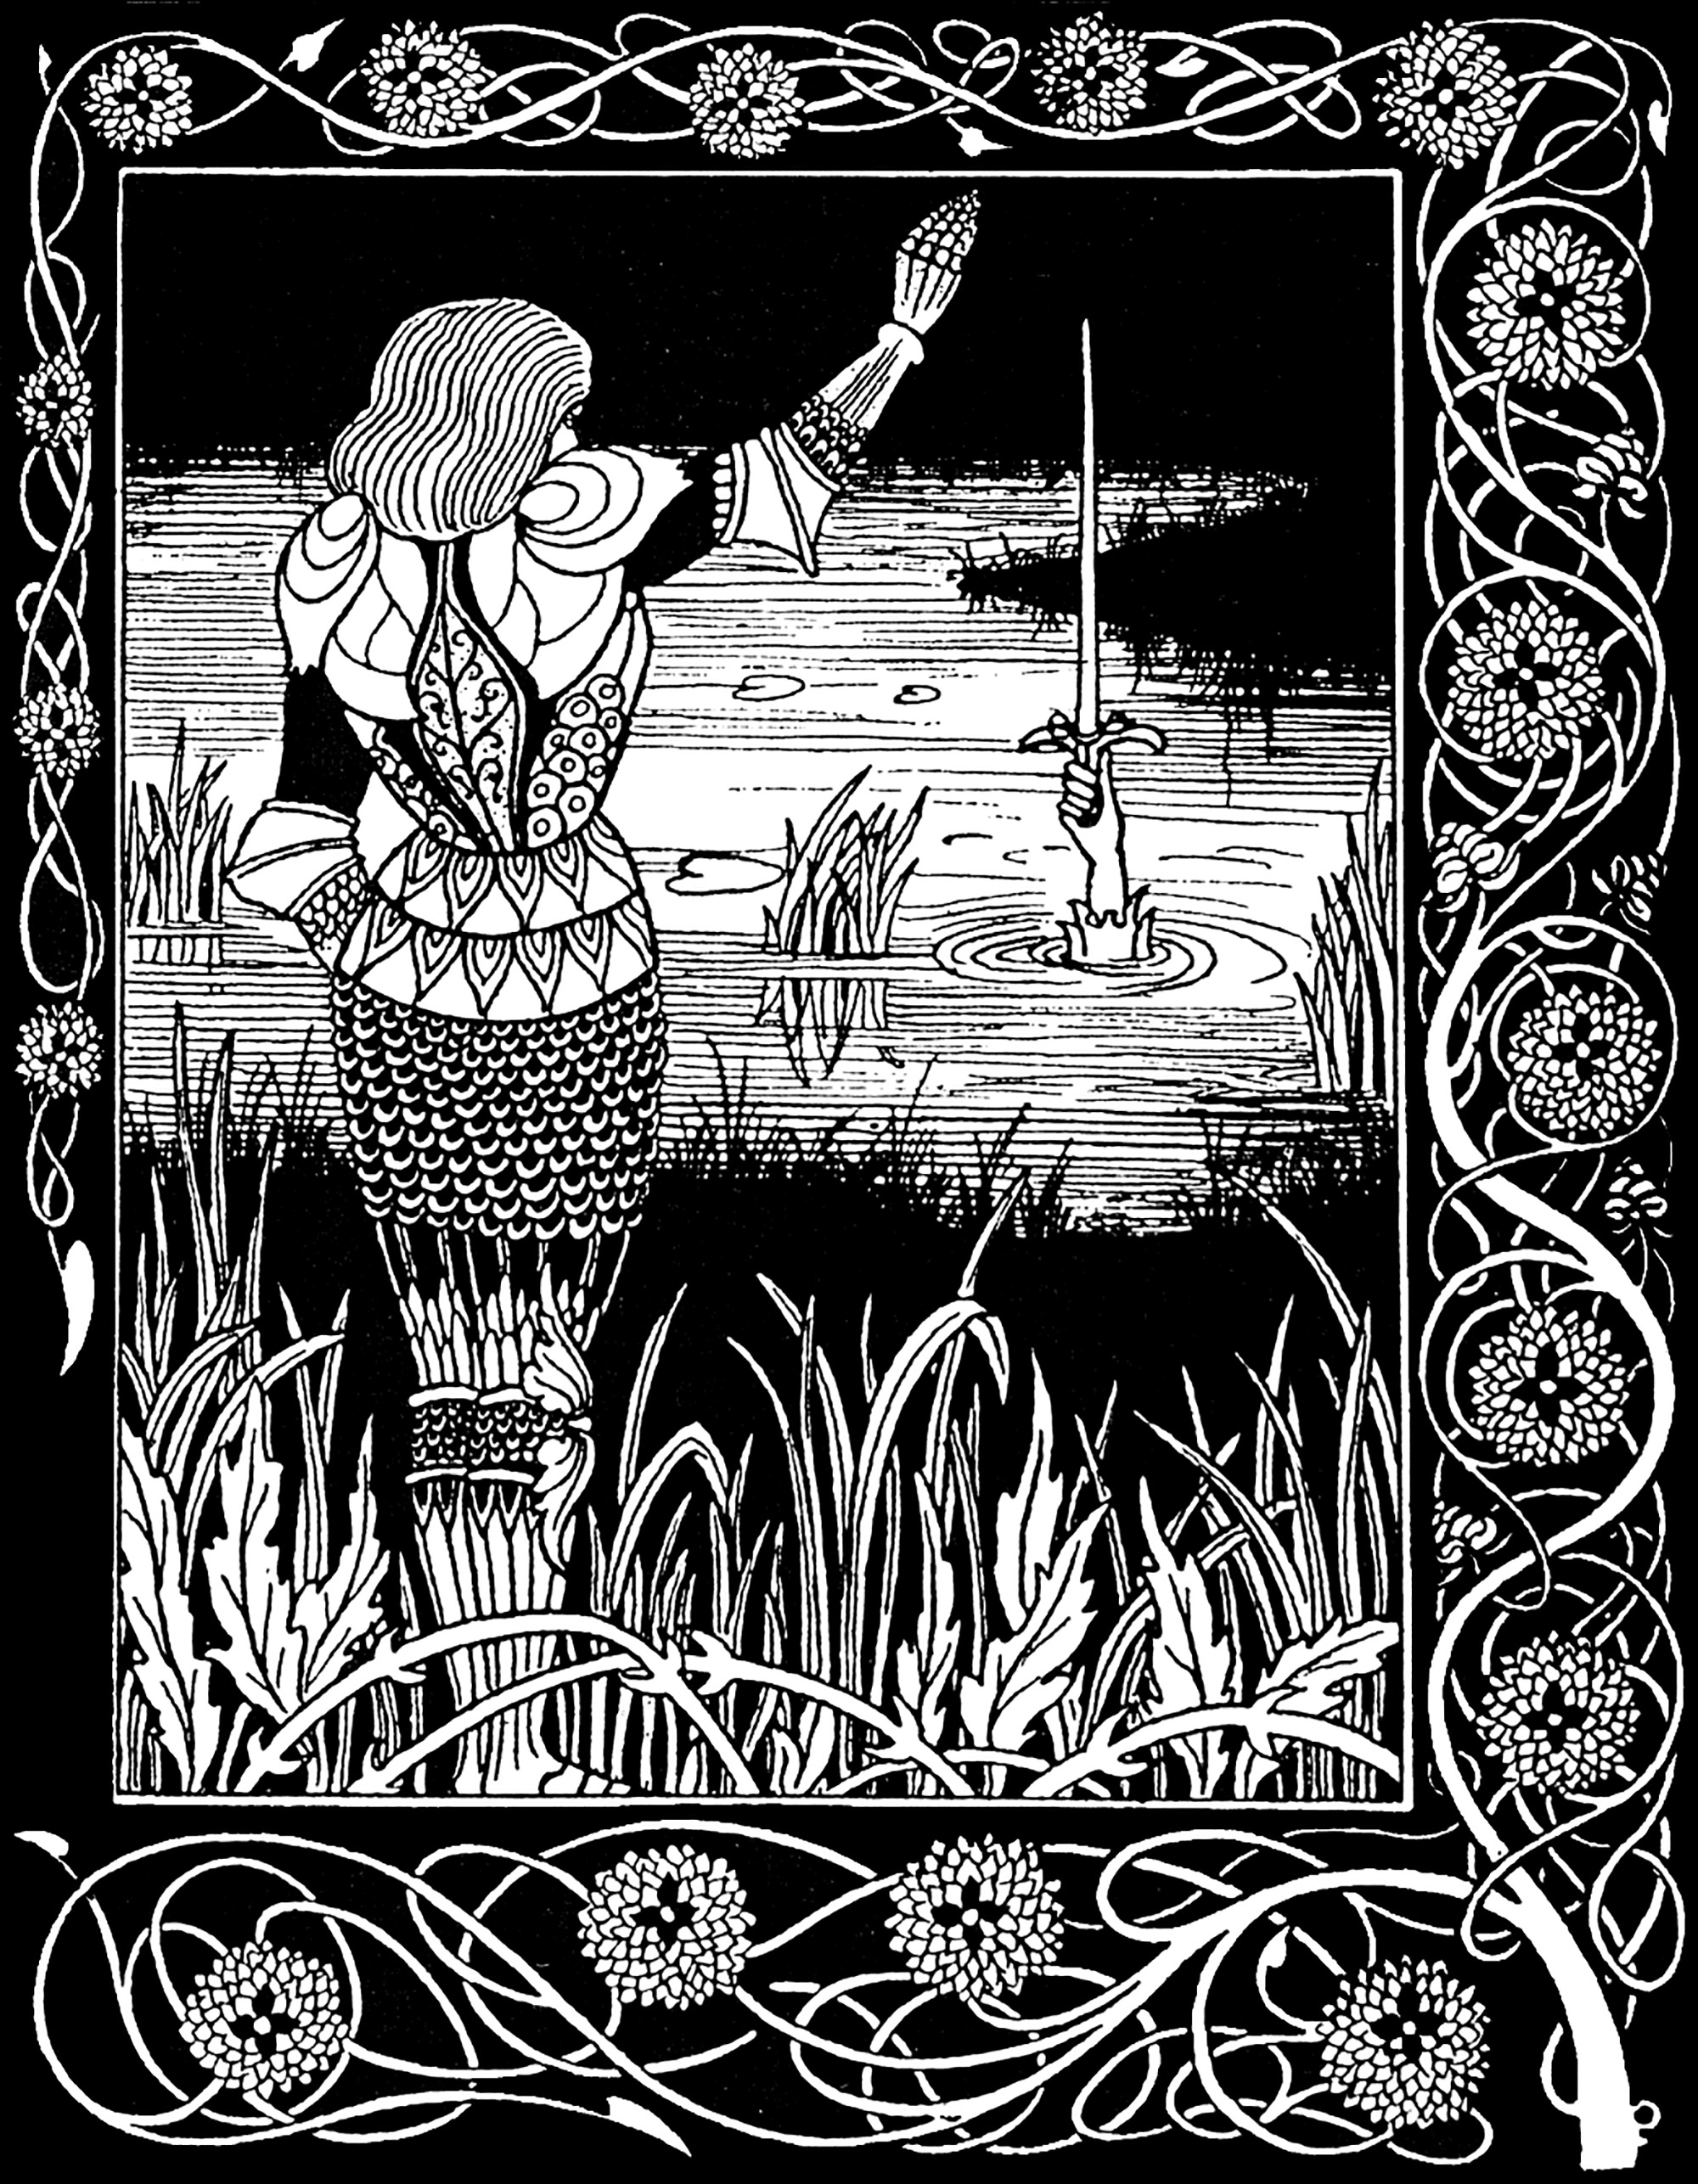 Sir Bedivere throwing Excalibur, Arthur's sword, into the lake from whence it came. Illustration by Aubrey Beardsley (1872-1898) for an edition of La Mort d'Arthur by Sir Thomas Malory (1893).